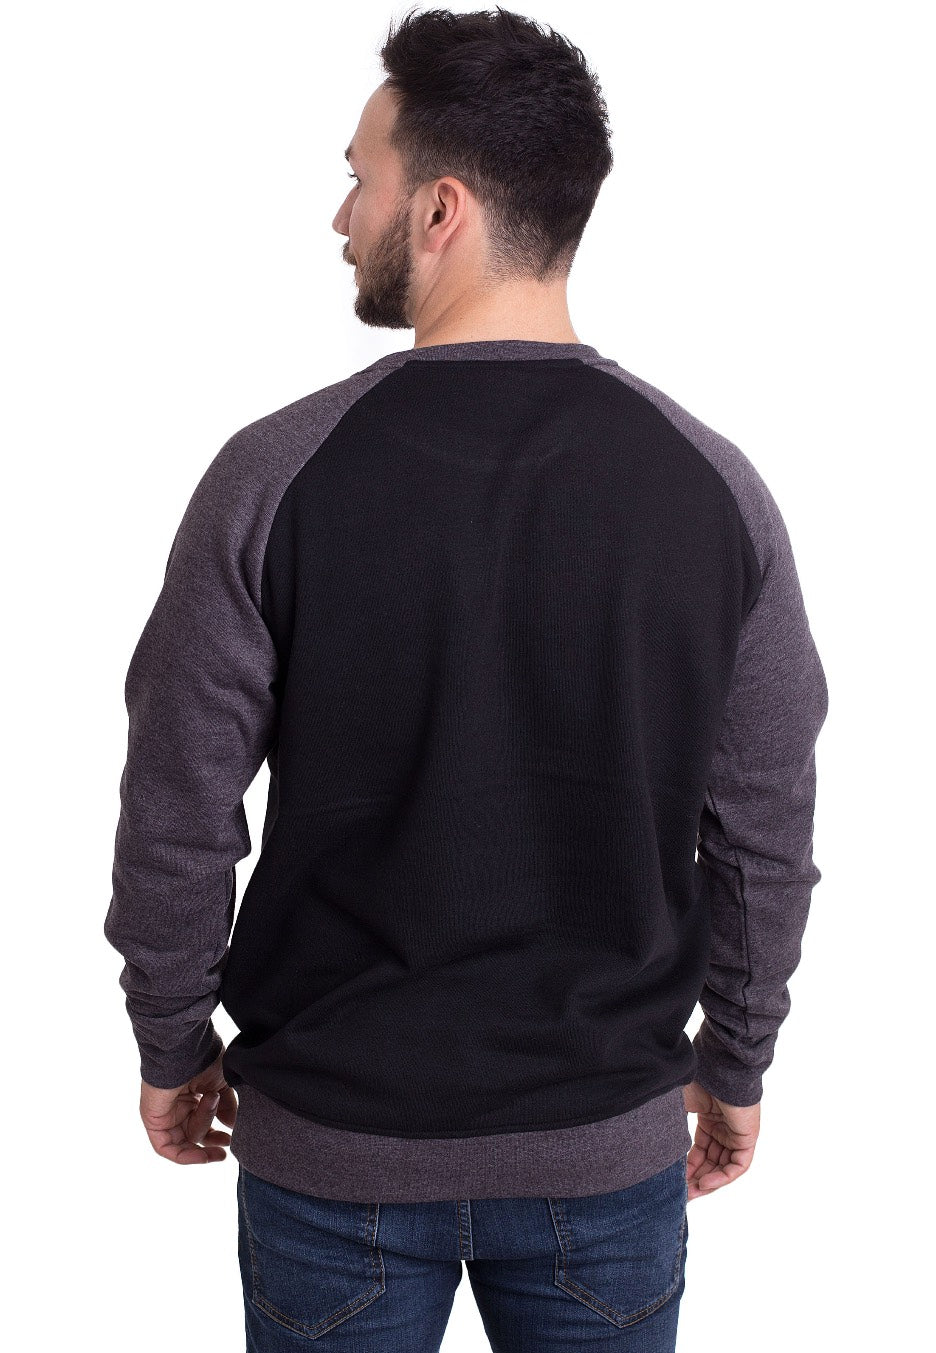 August Burns Red - Hand Black/Charcoal - Sweater | Men-Image